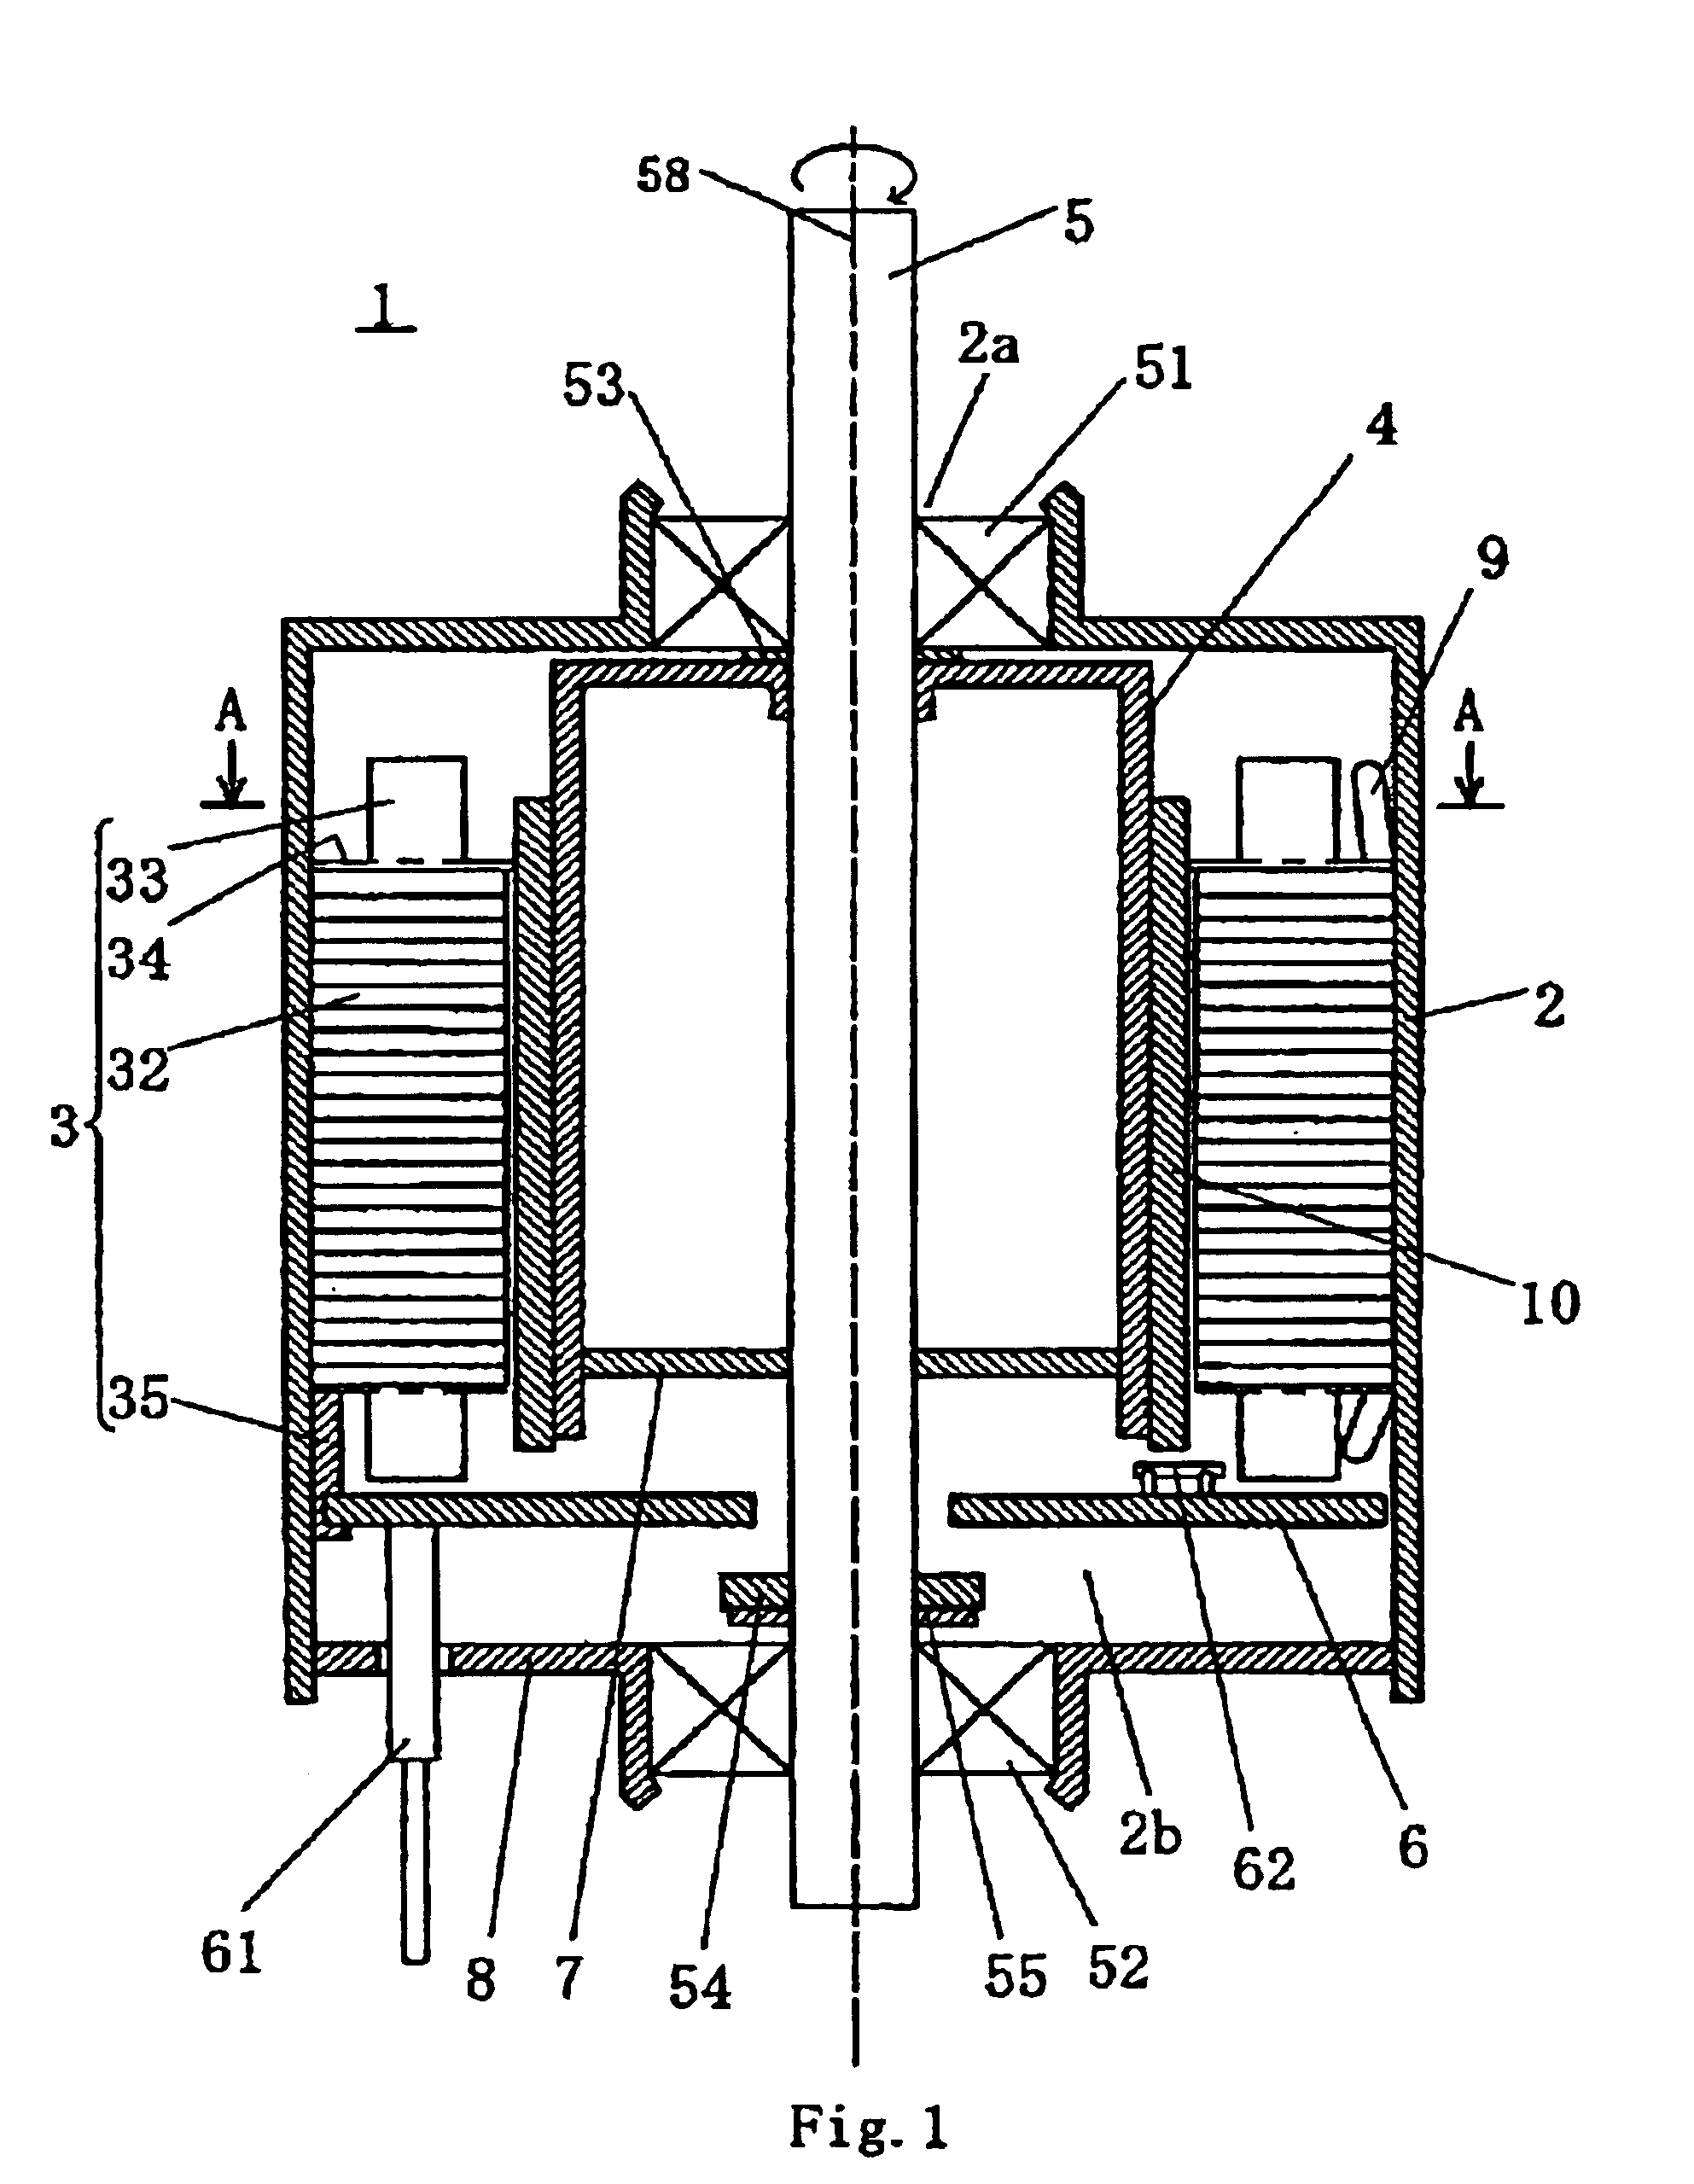 Method of installation of a laminated stator core stack in the motor casing